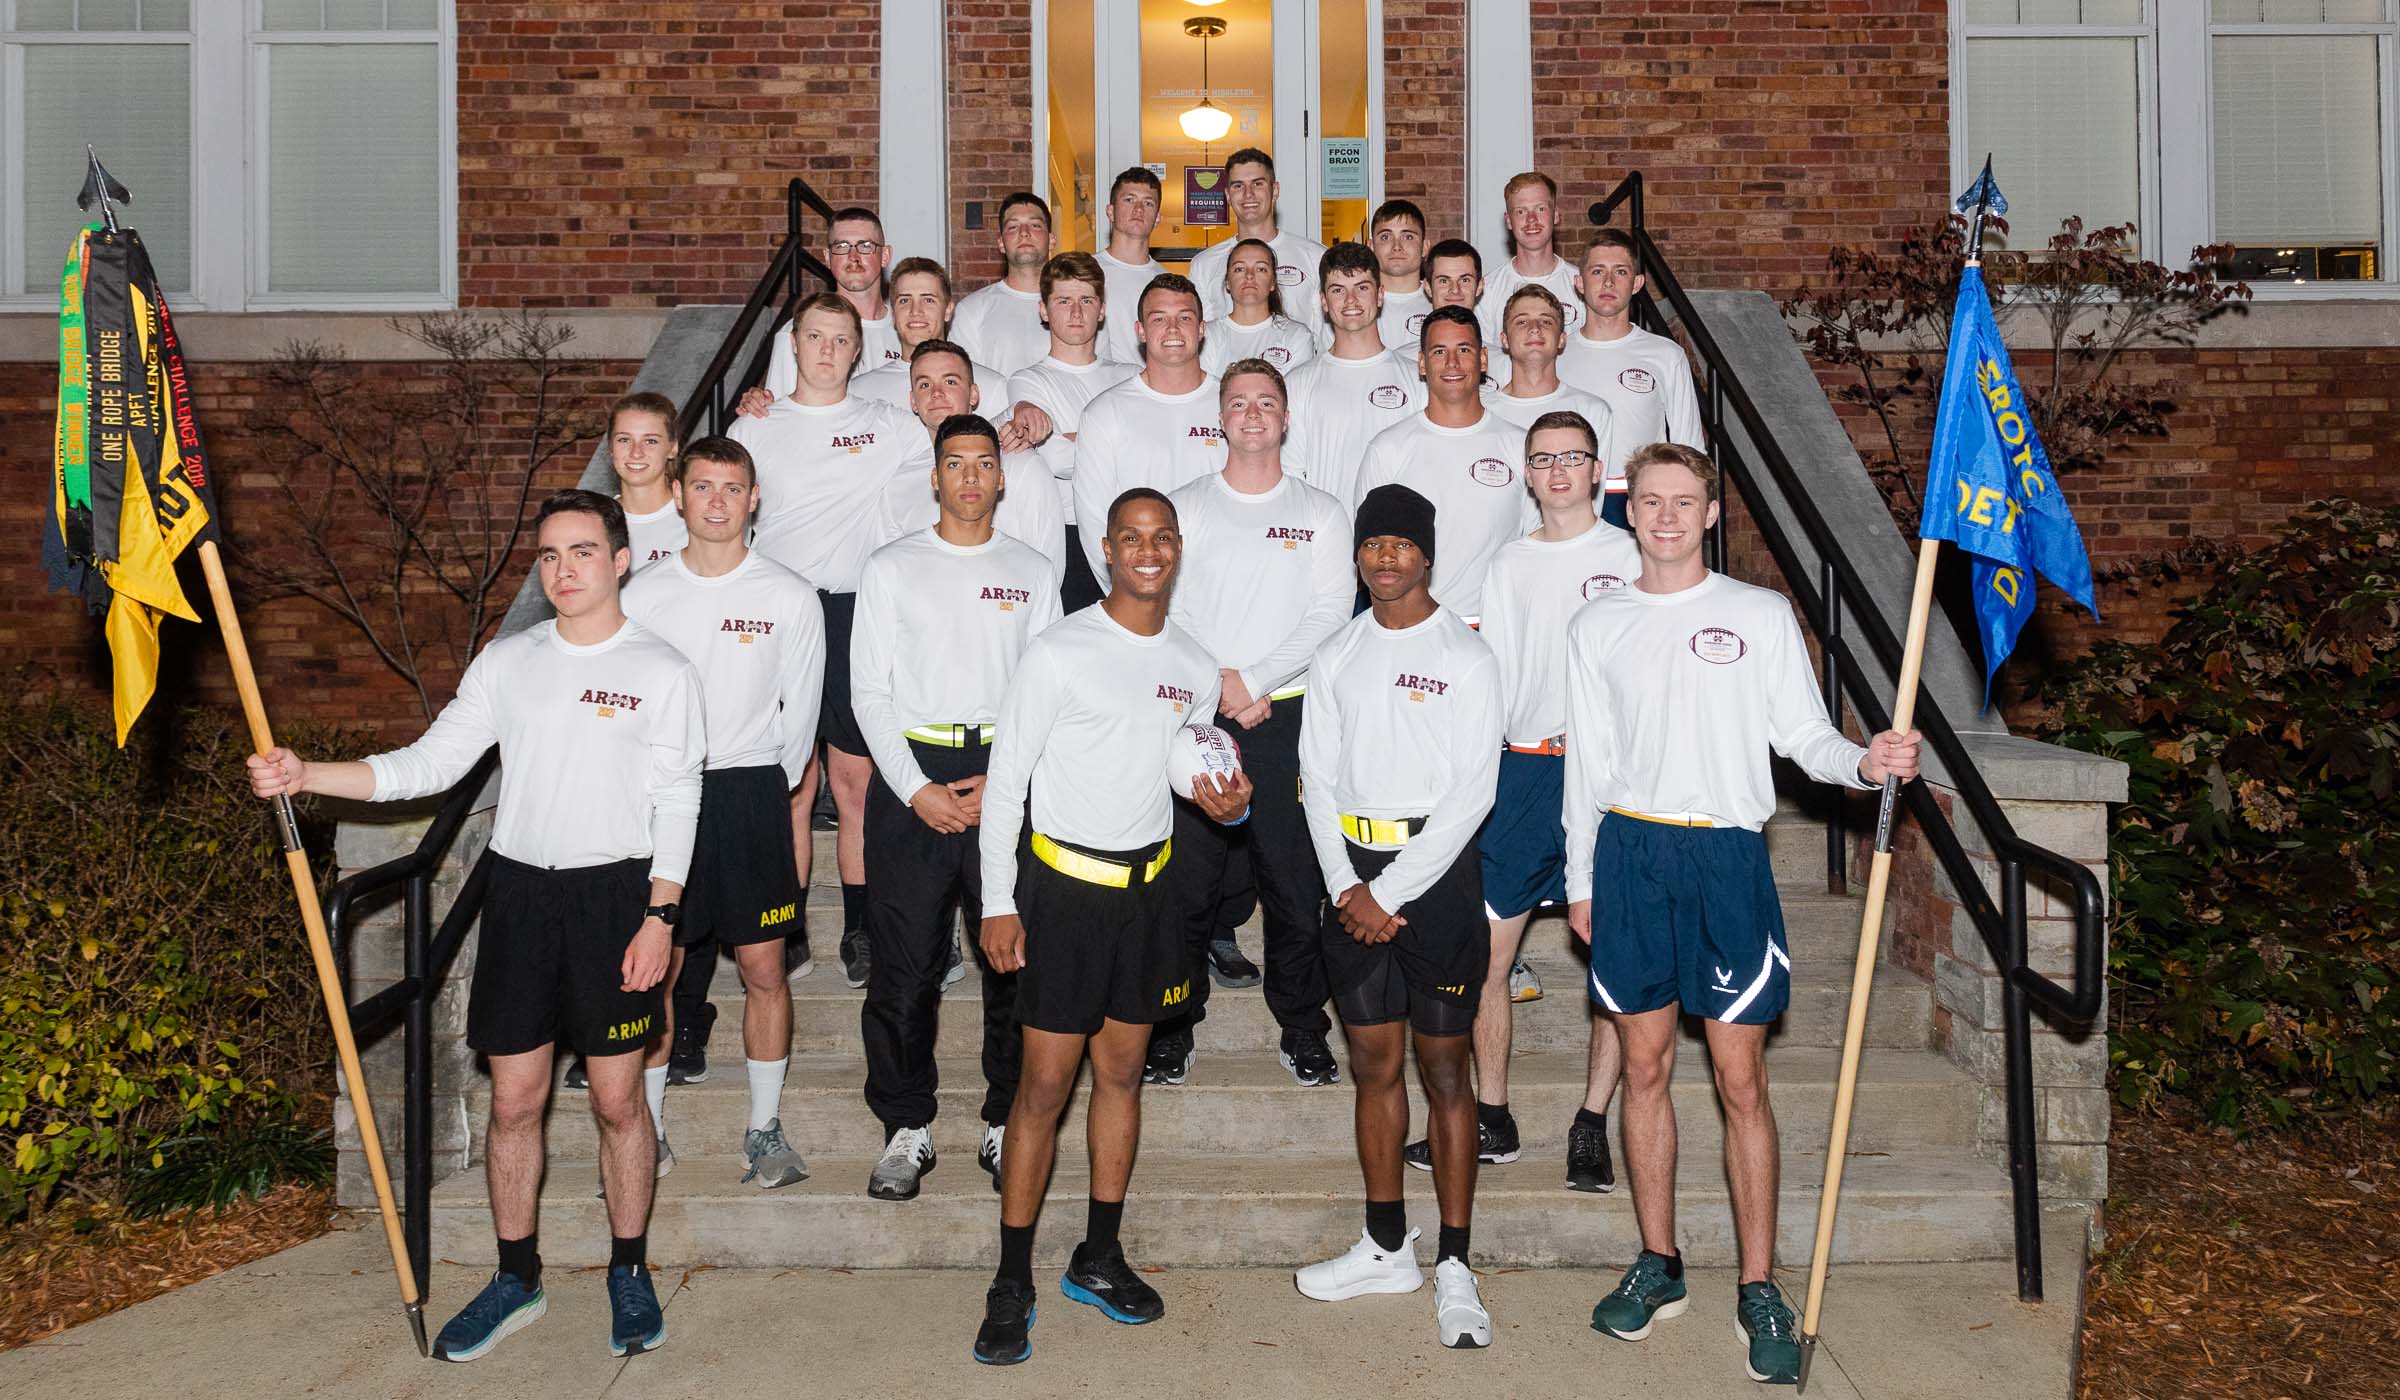 ROTC members posing outside Middleton Hall after Egg Bowl Run